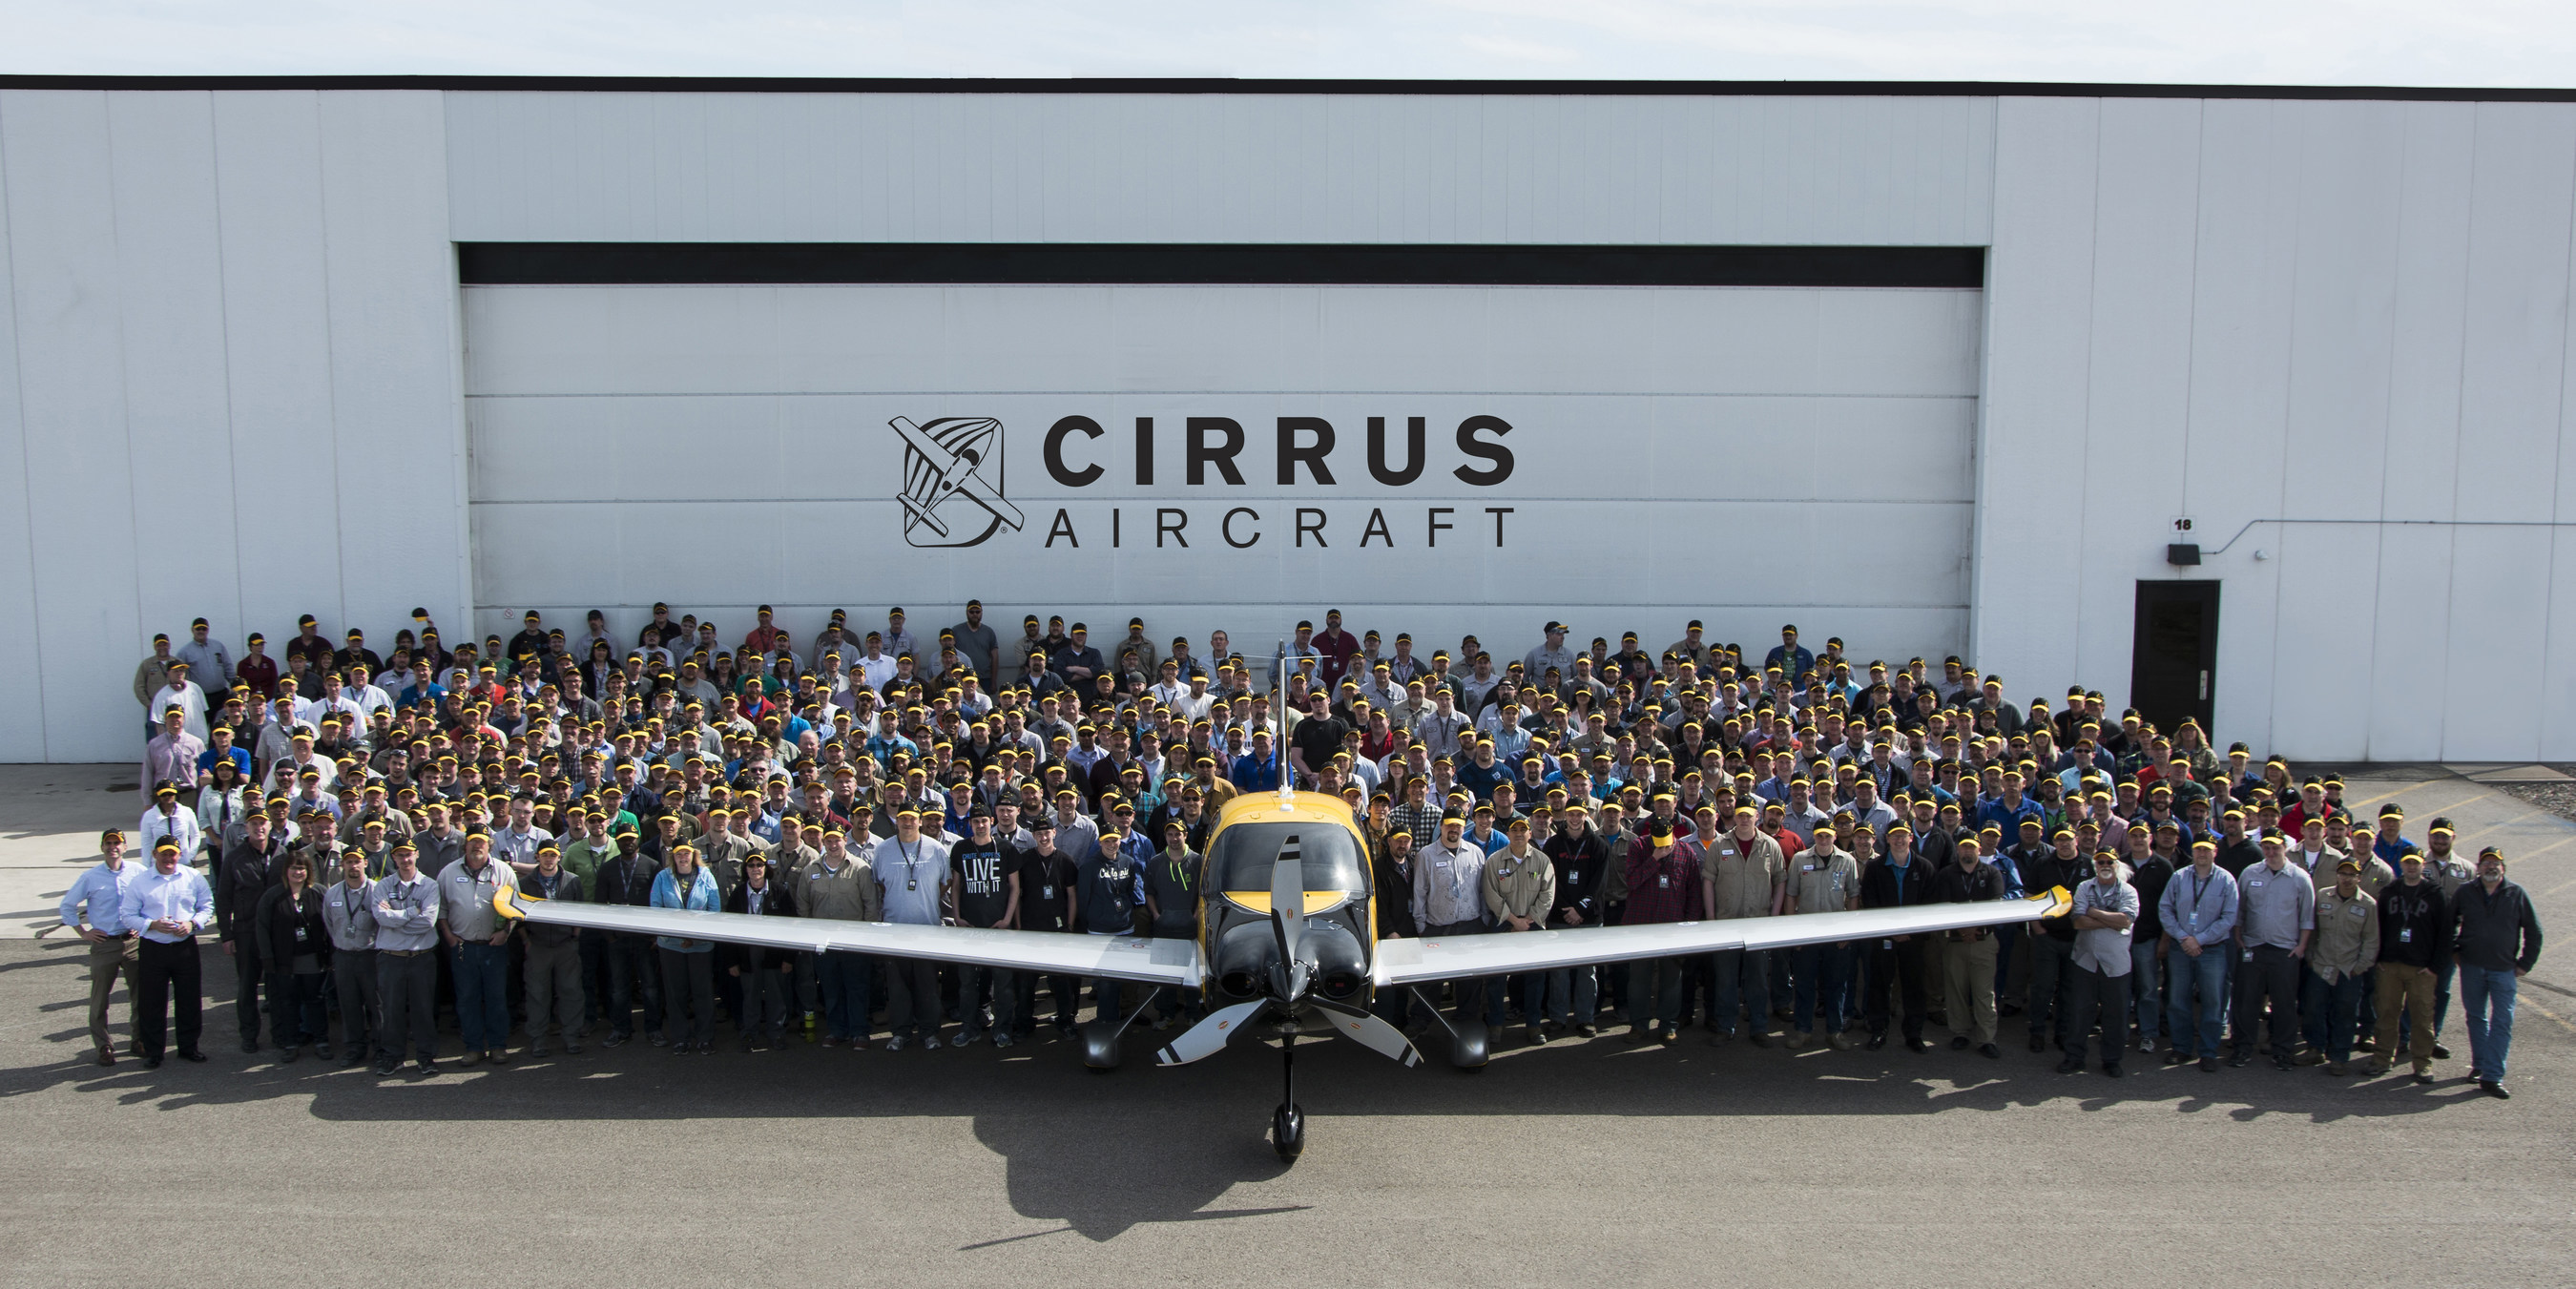 Cirrus Aircraft Delivers 6,000th Airplane